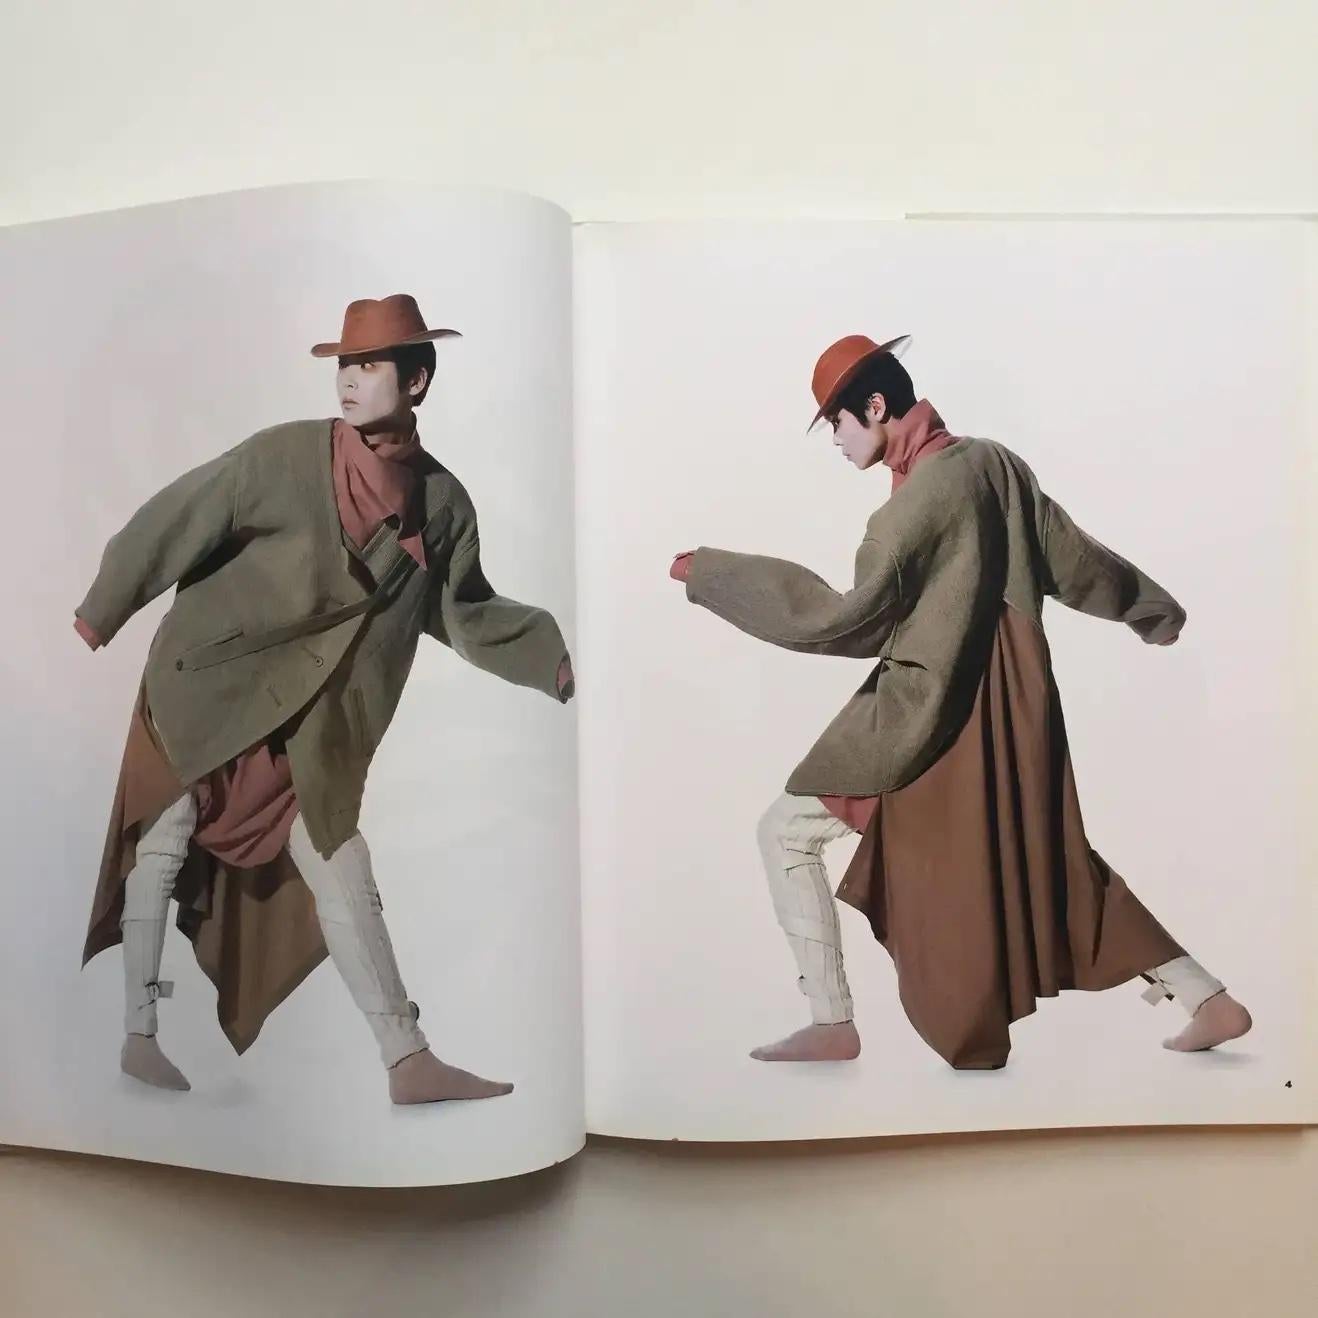 20th Century Issey Miyake, Photographs by Irving Penn, Little, Brown and Company, 1988